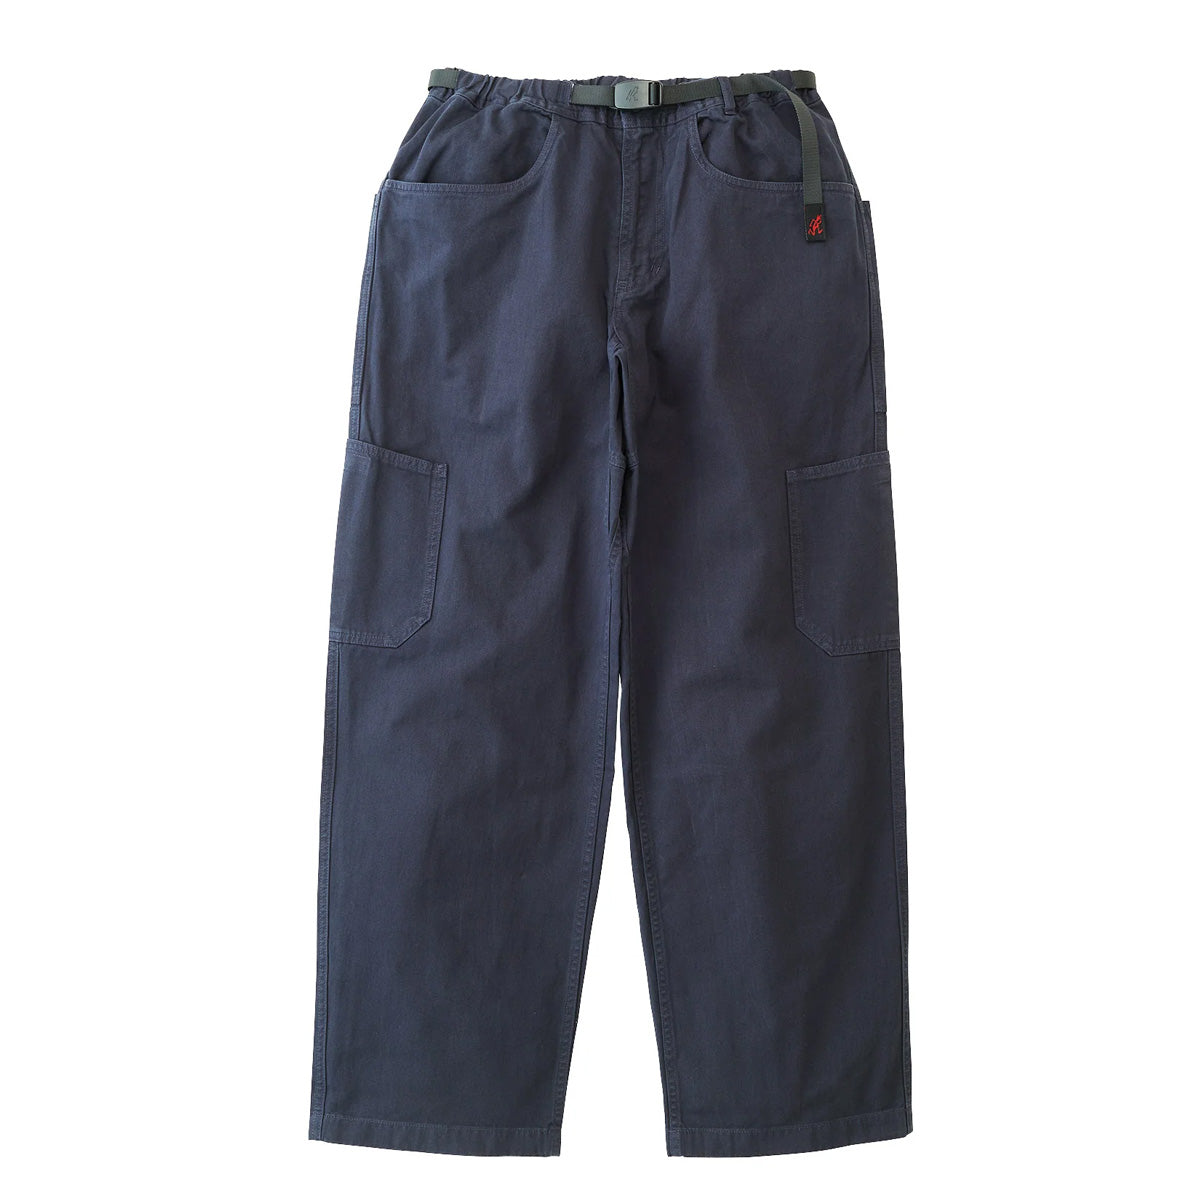 Navy blue gramicci outdoor trousers with Velcro side pockets and adjustable waist. Free uk shipping over £50